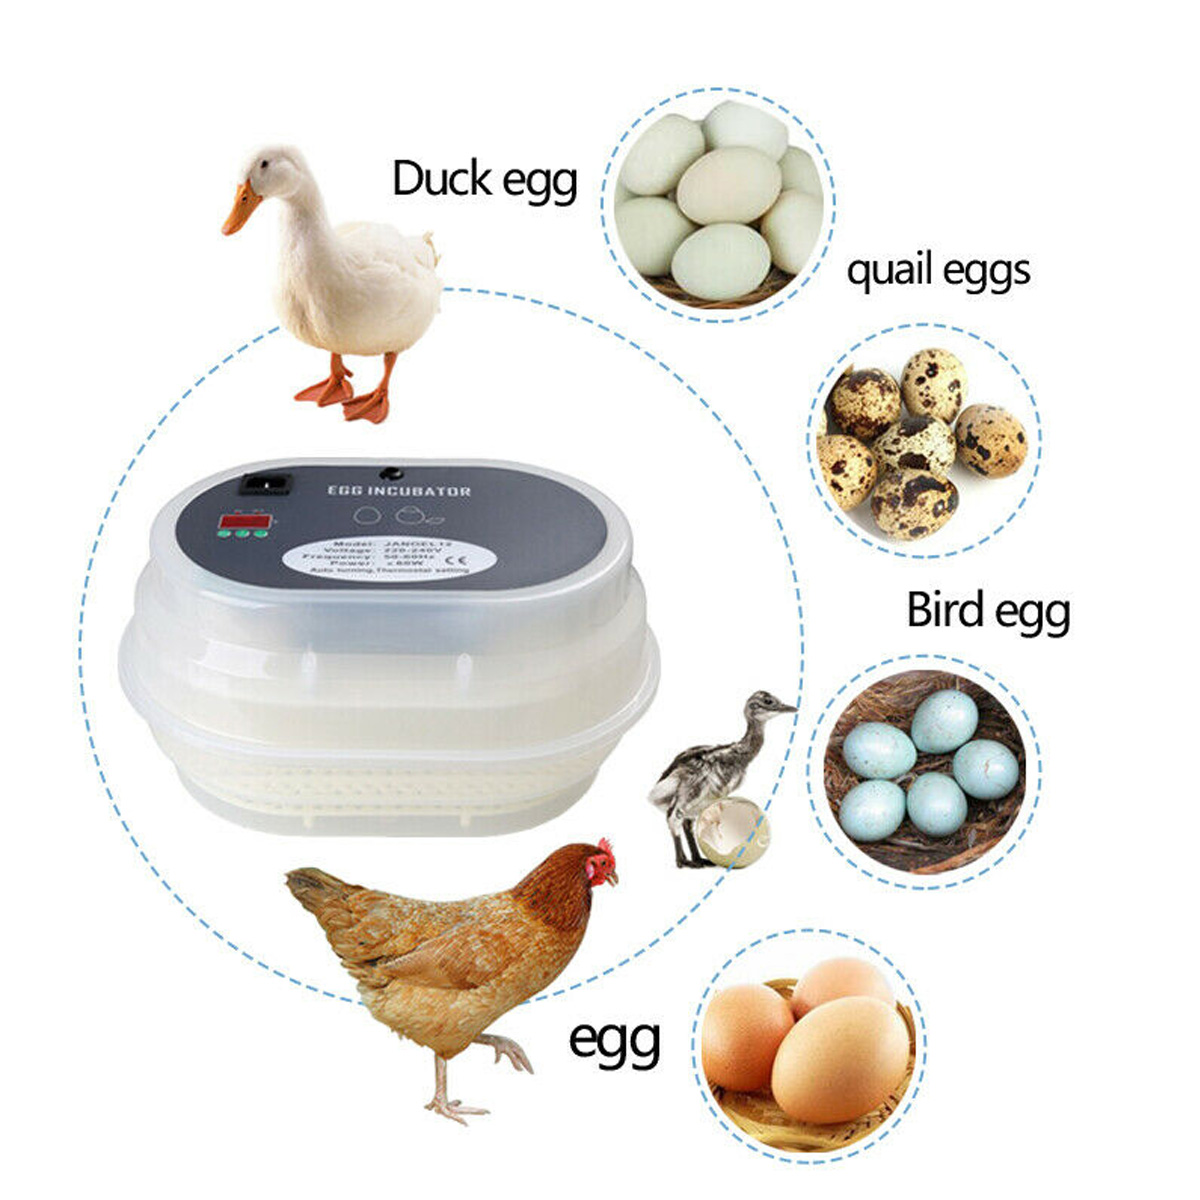 12-Eggs-Incubator-Fully-Automatic-Chicken-Poultry-Duck-Quail-Egg-Hatcher-1742597-4